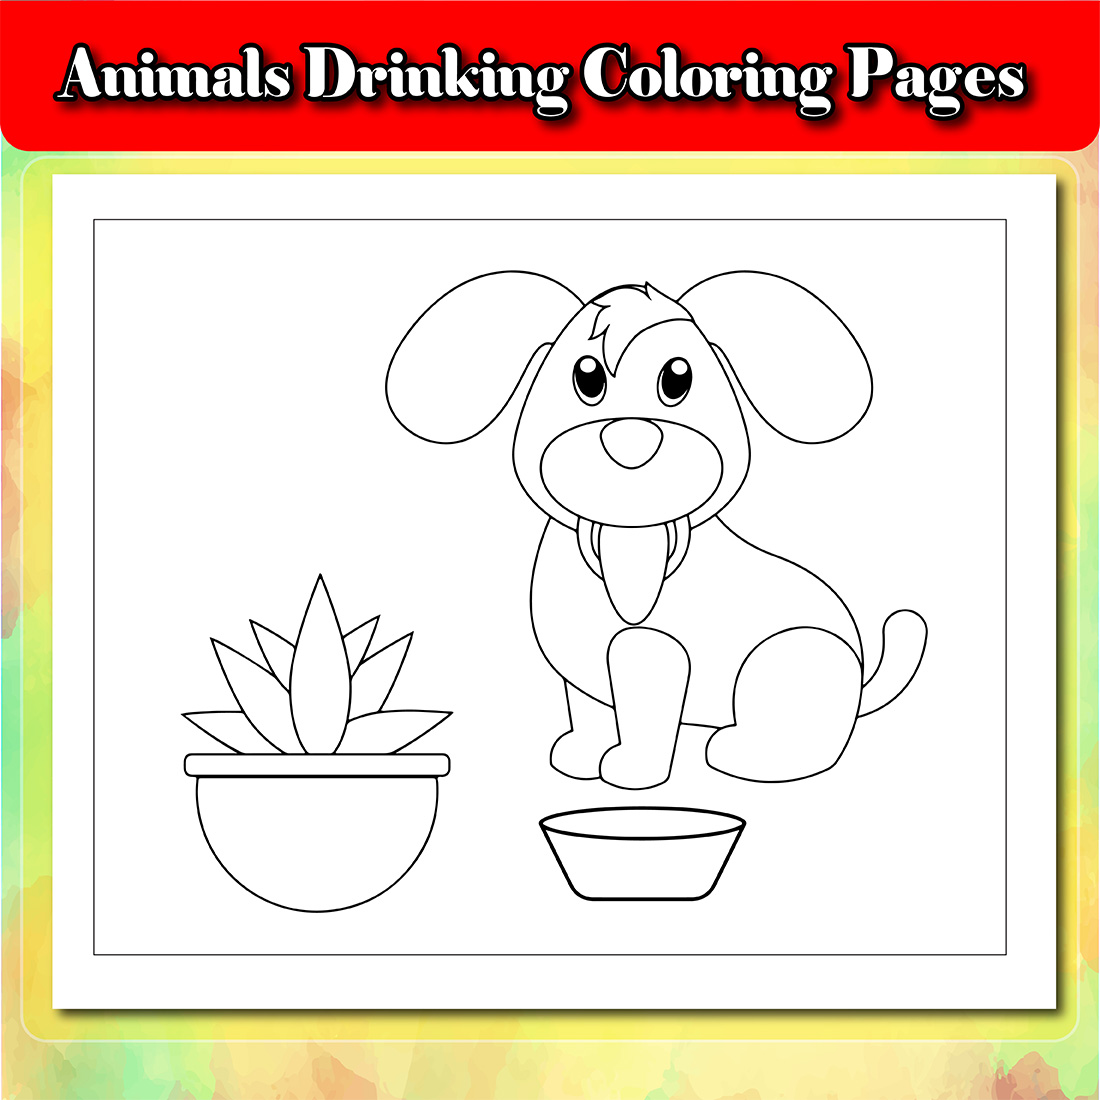 Animals Drinking Coloring Pages.